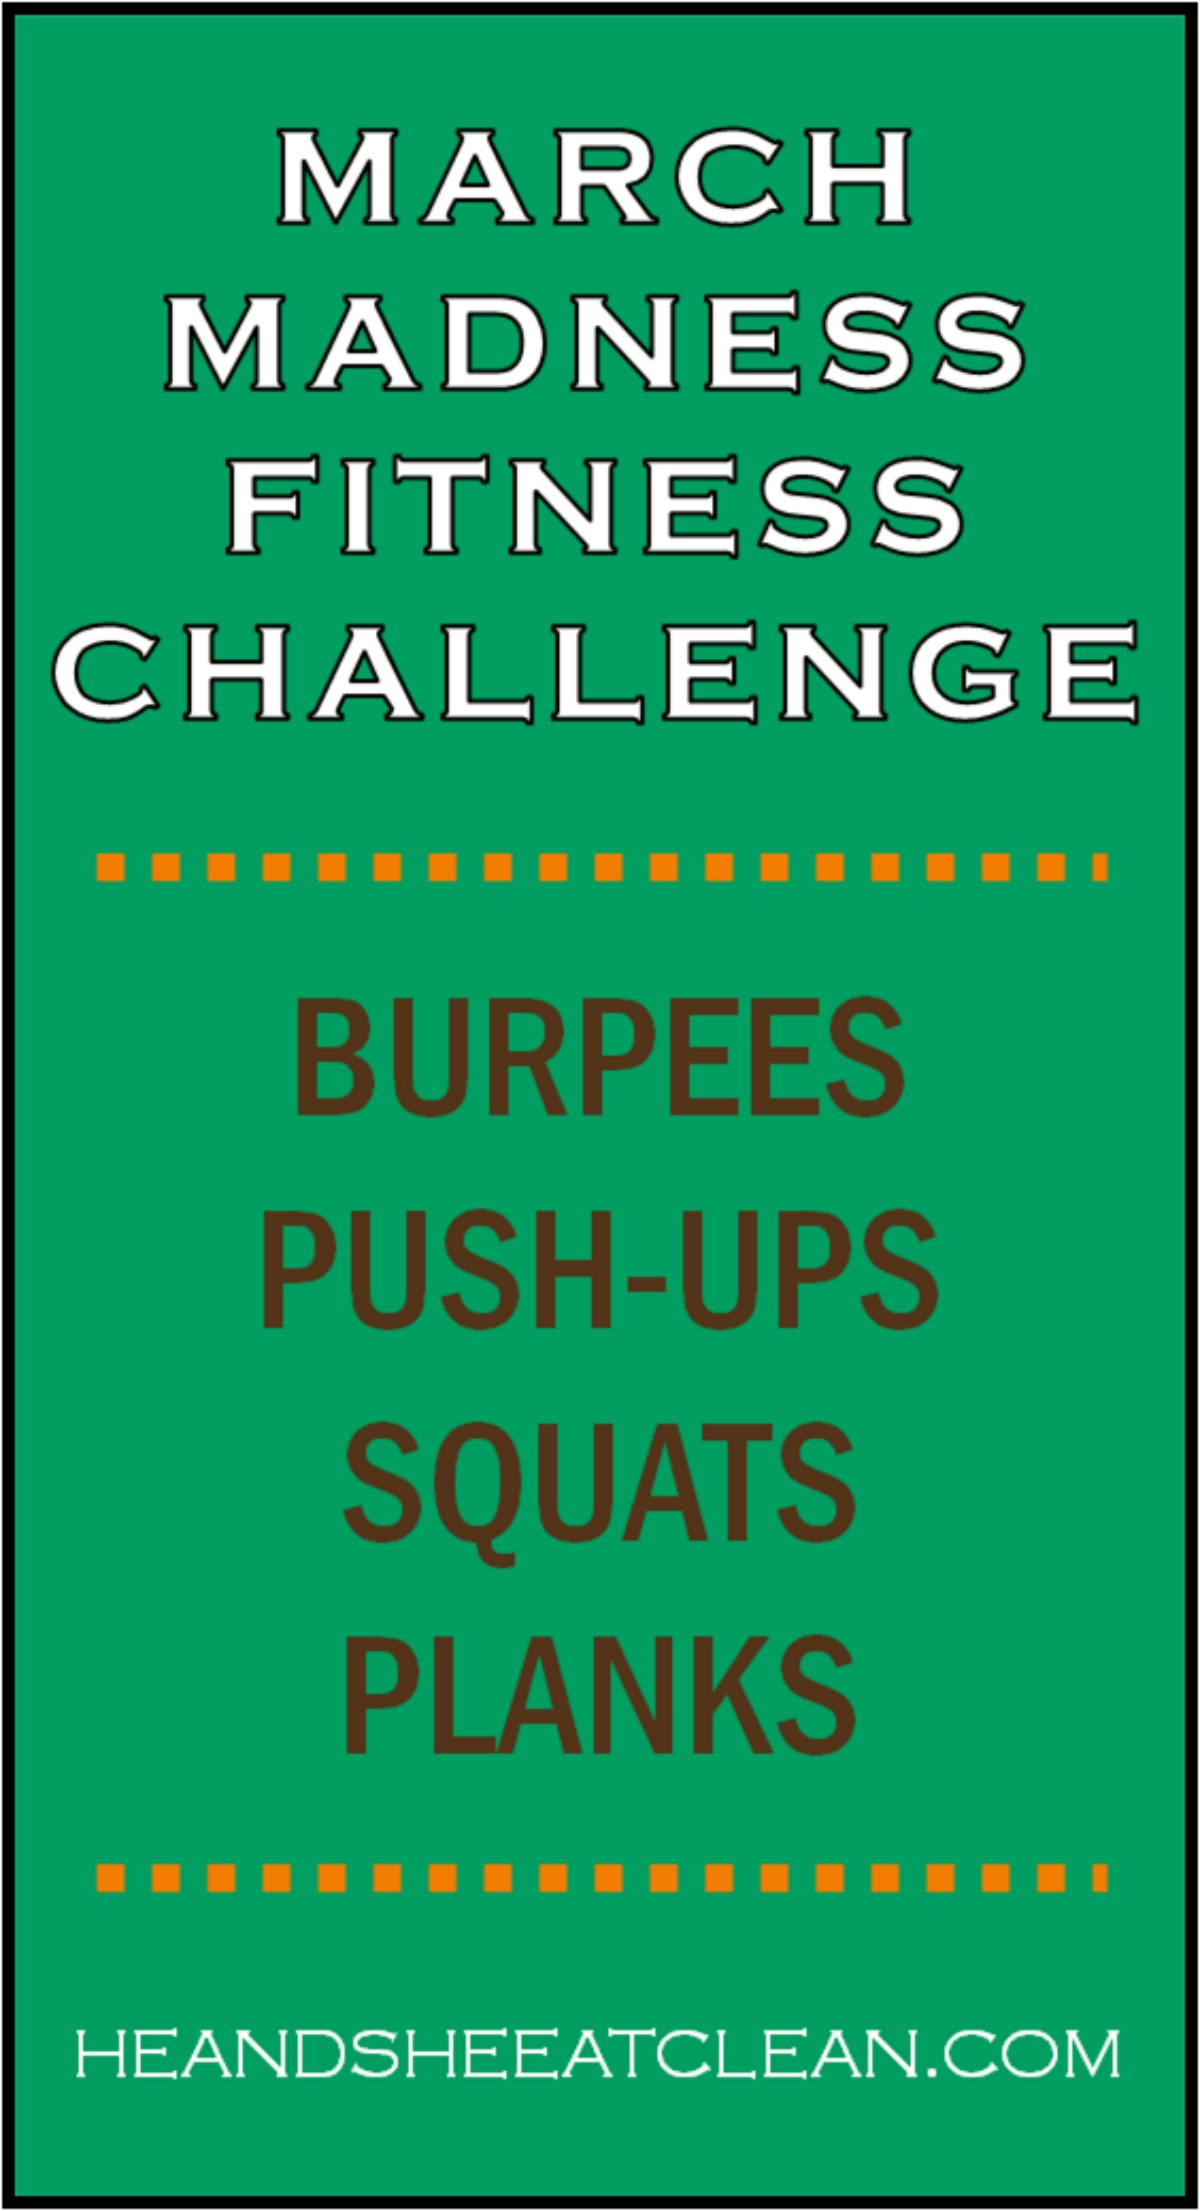 https://www.heandsheeatclean.com/wp-content/uploads/2015/02/march-madness-fitness-workout-challenge-he-and-she-eat-clean-burpees-pushups-squats-plank-core-abs-fullbody-blast-fat-fast-1.jpg